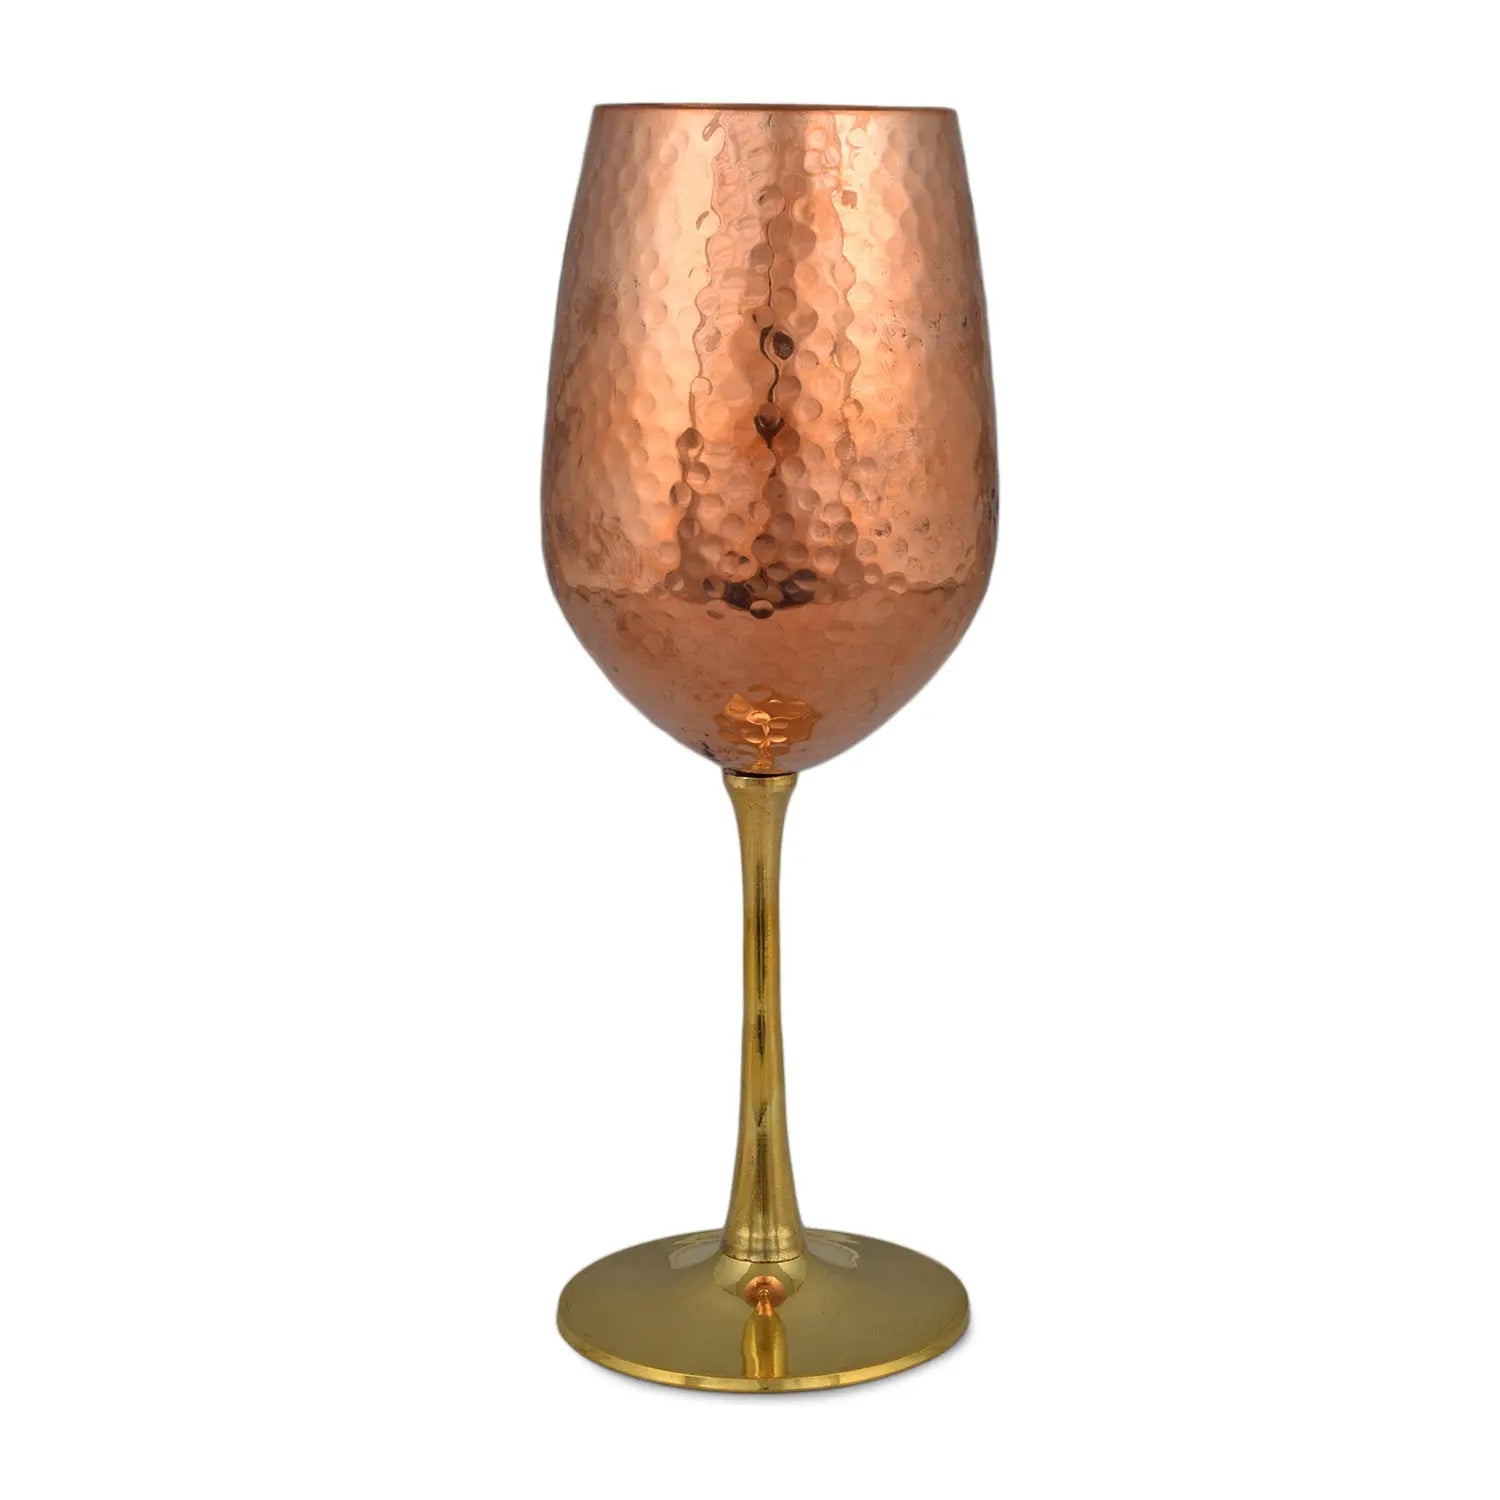 Crockery Wala And Company Hammered Copper Goblet Champagne Wine Glass, Perfect Drinking Experience, 300 ML - CROCKERY WALA AND COMPANY 